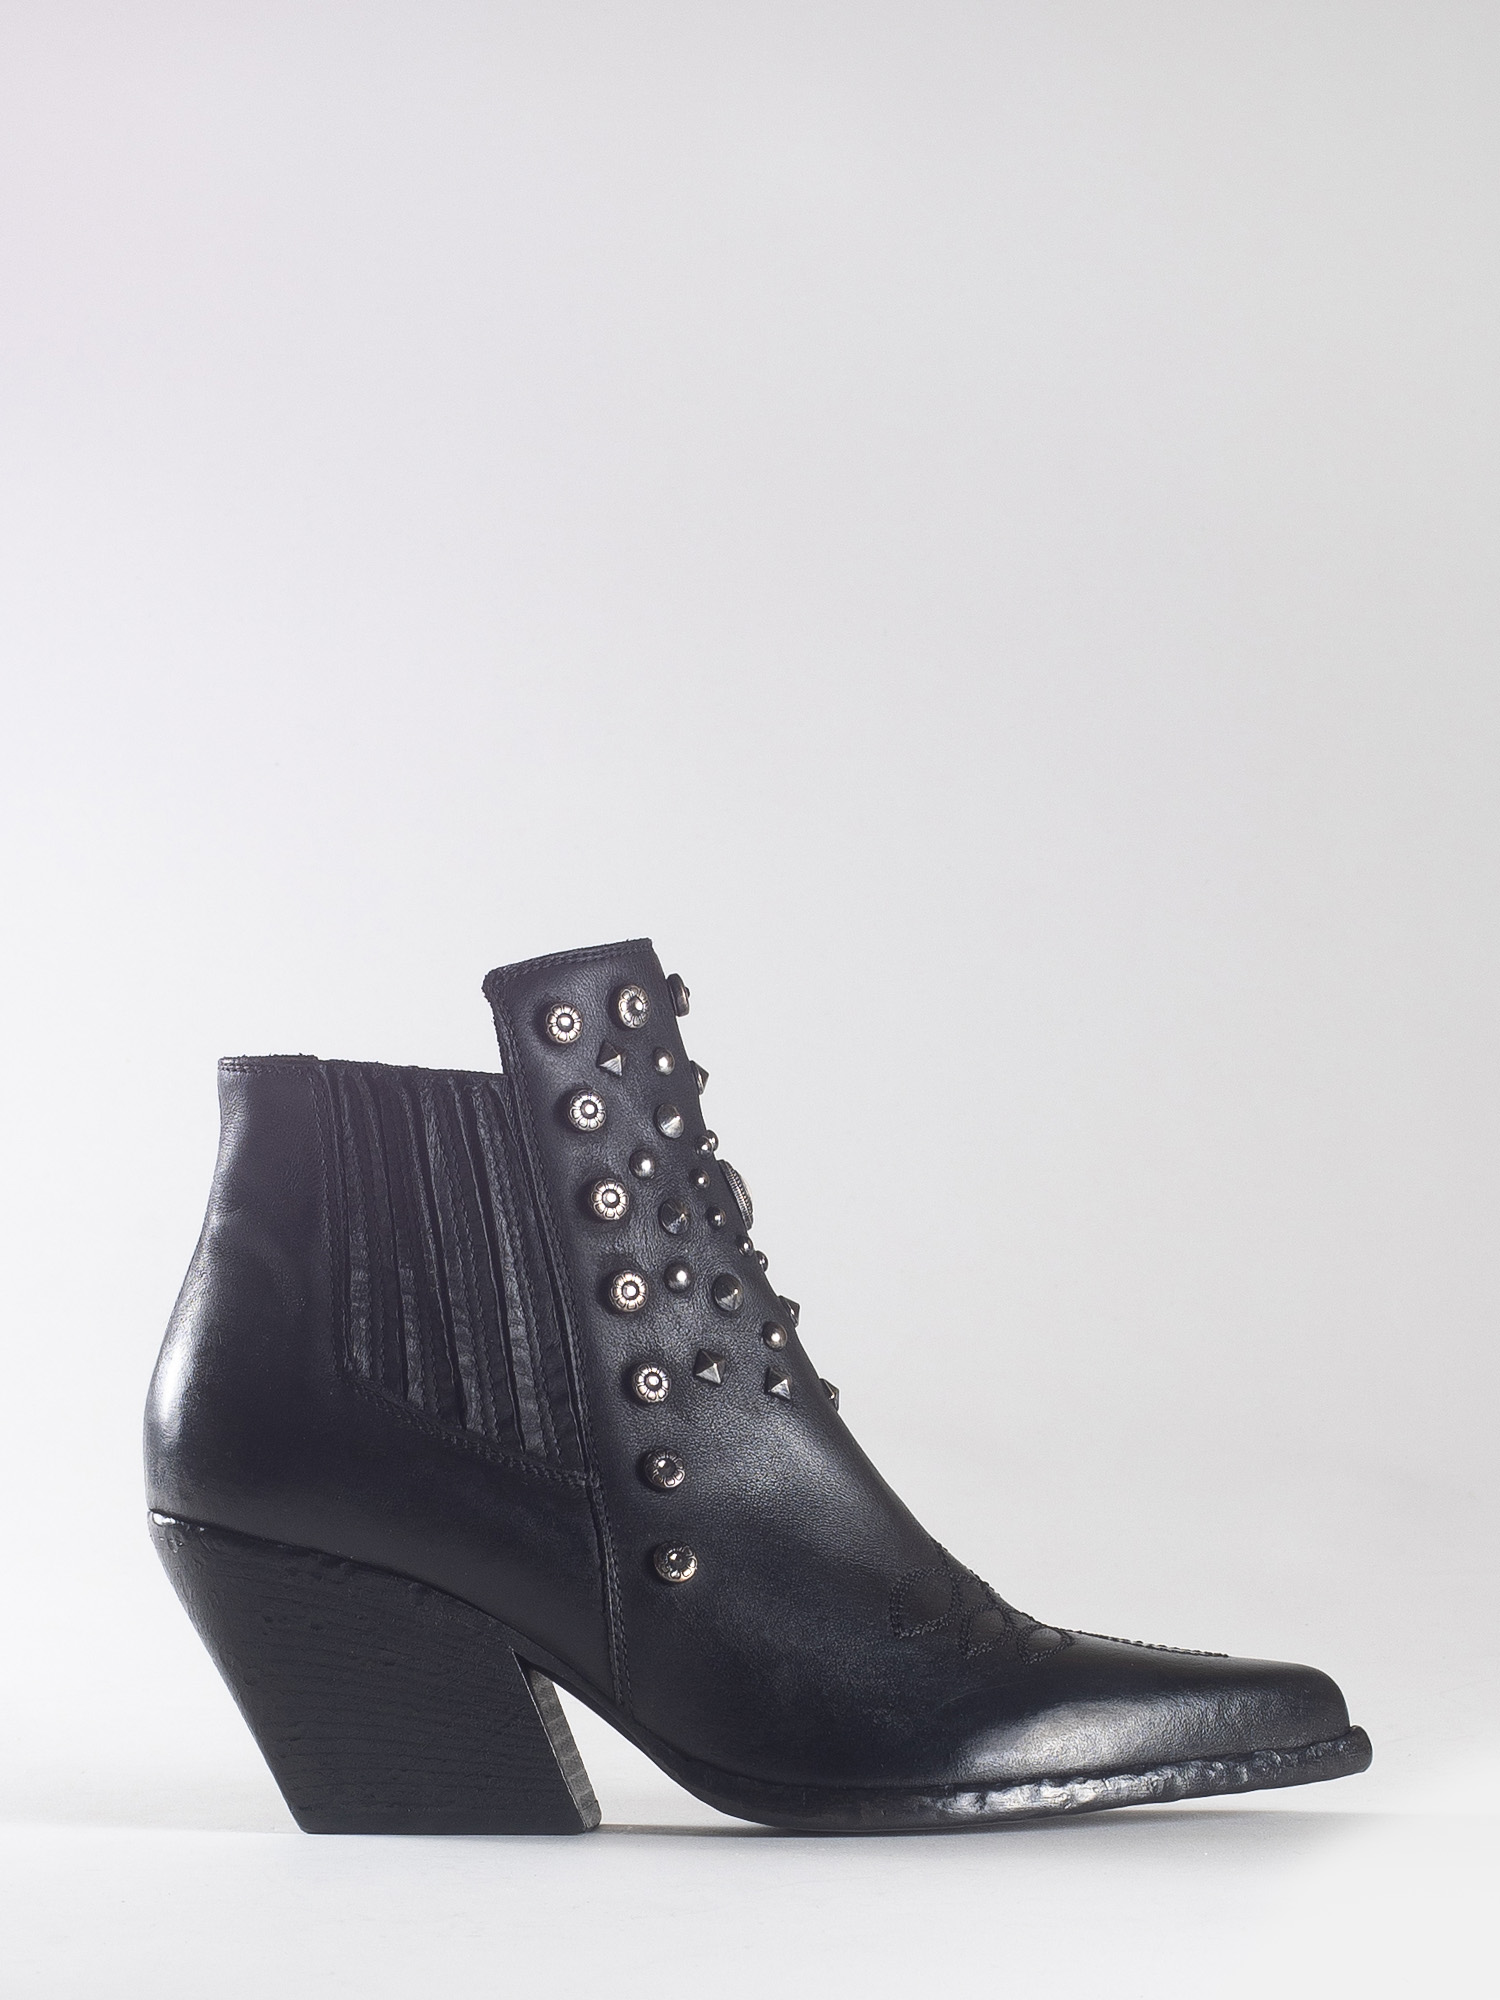 LEATHER COSSACK BOOTS - STRATEGIA